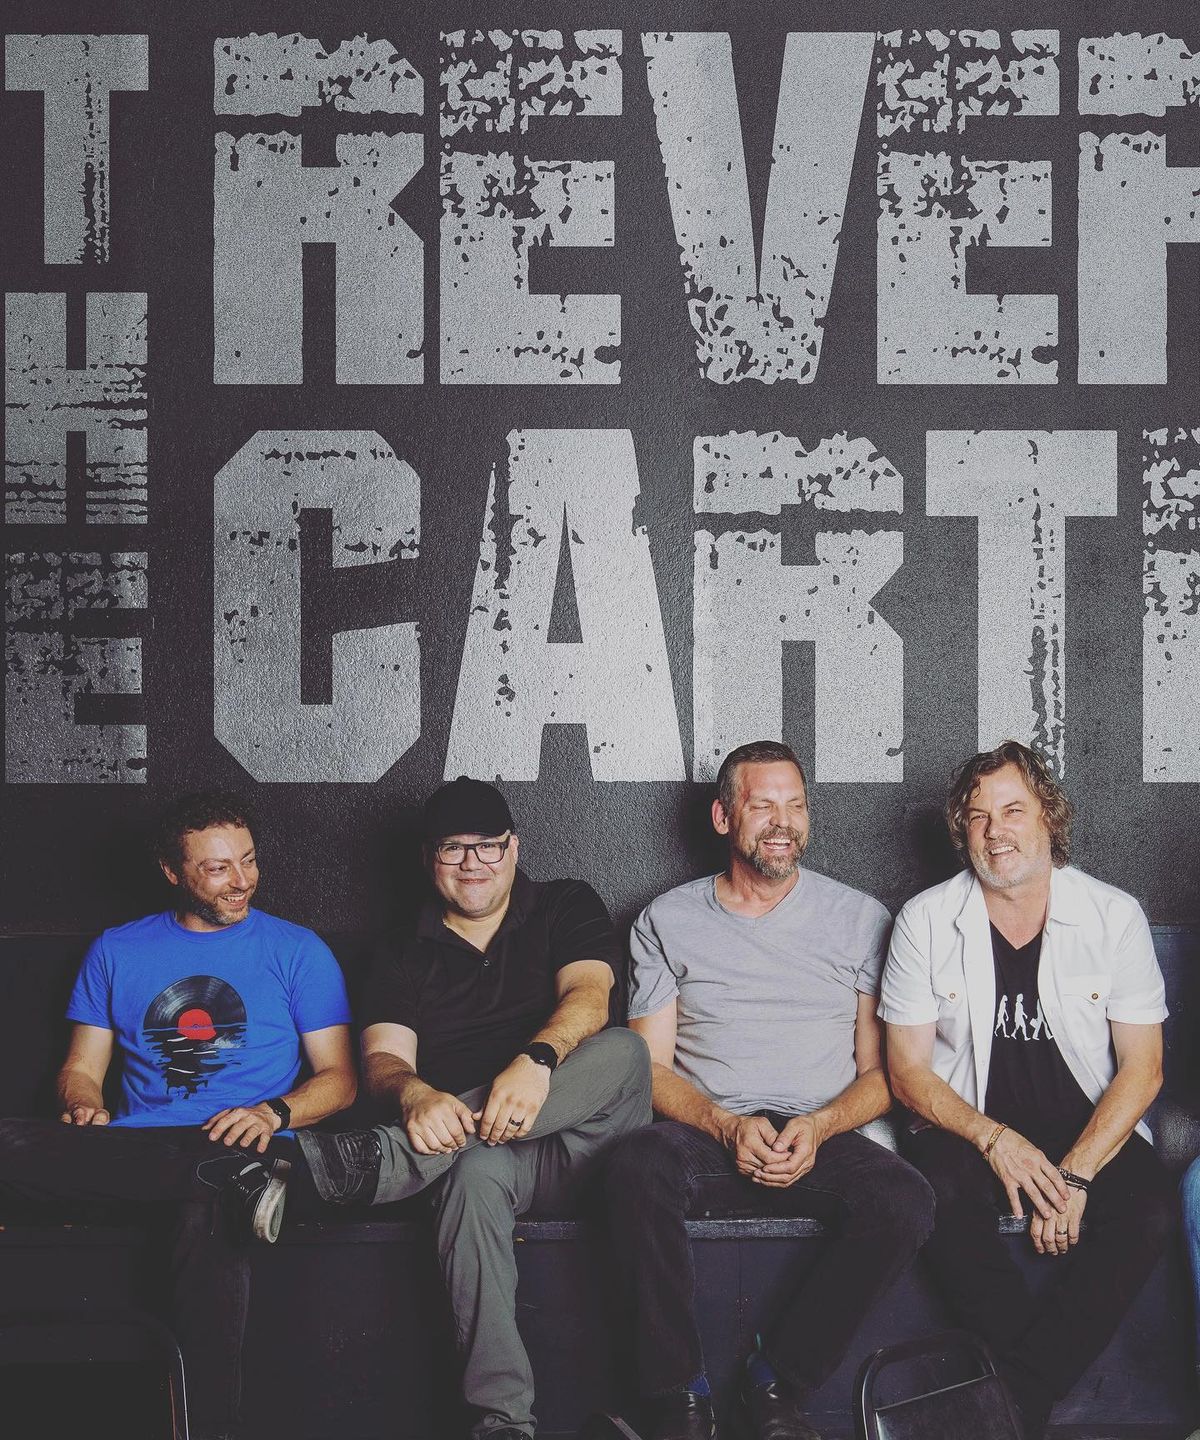 Live Music by The Reverb Cartel!